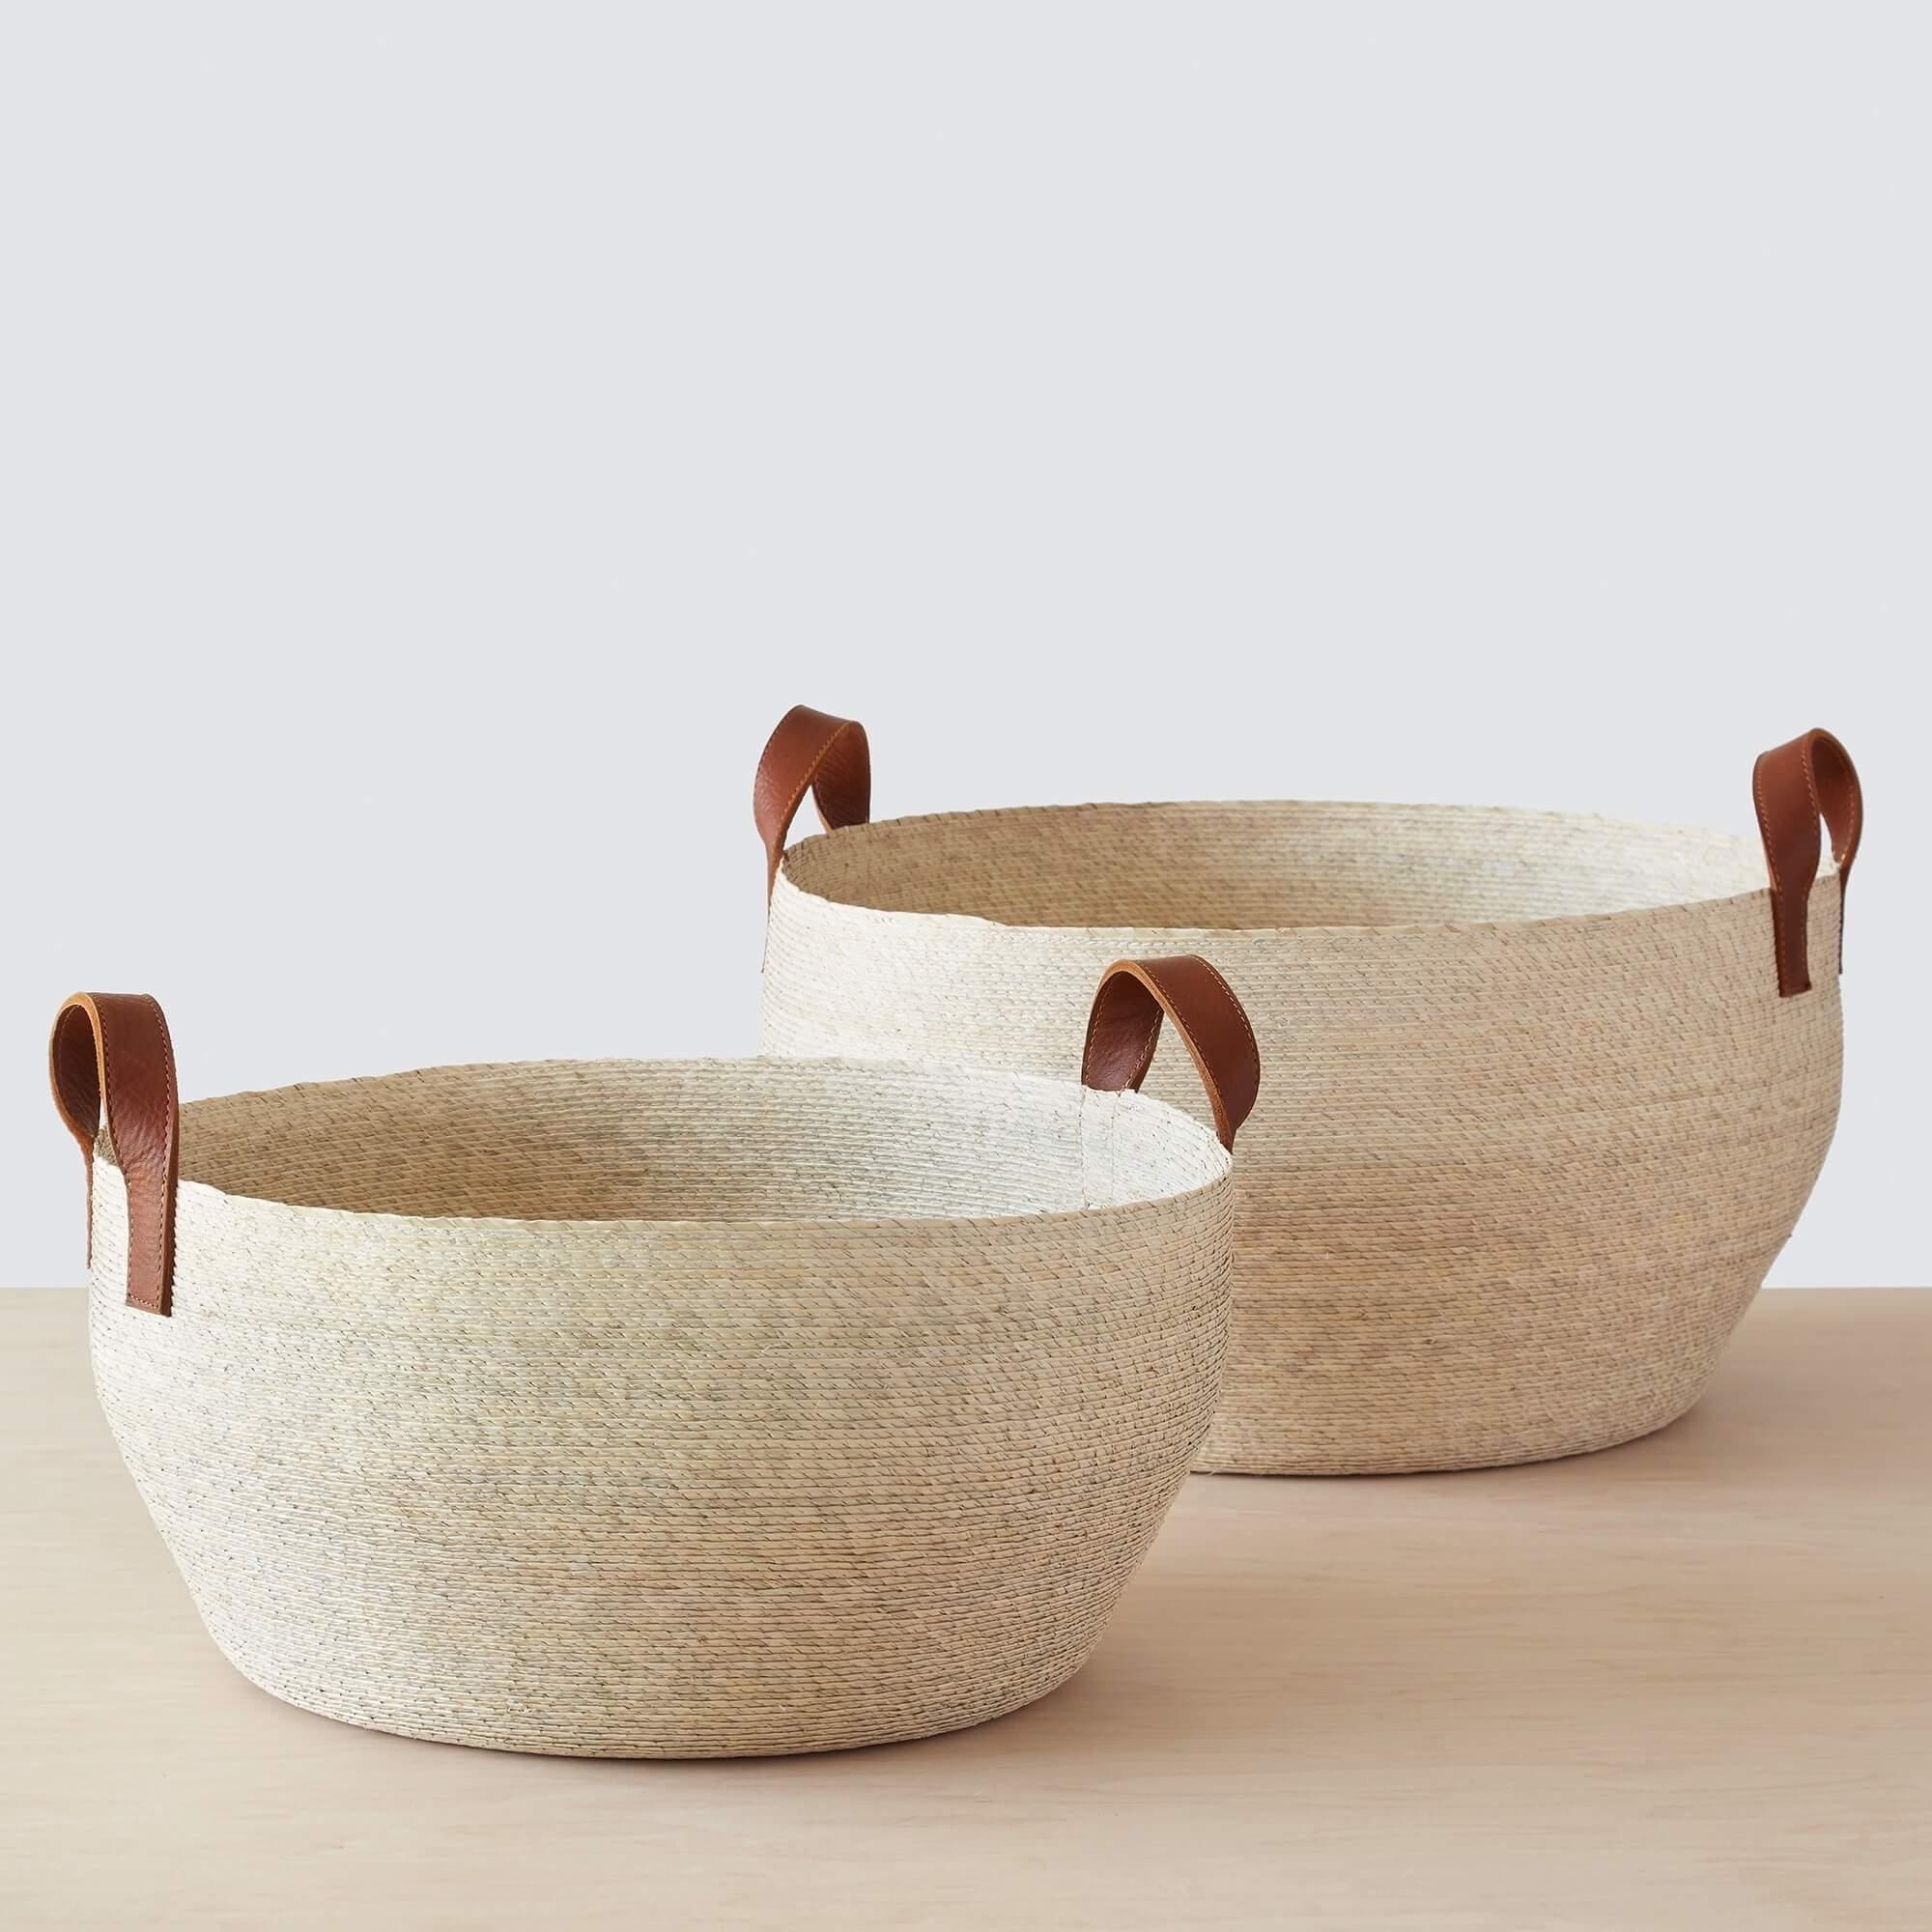 Mercado Floor Baskets - Set of Two - 1 ea. By The Citizenry - Image 0